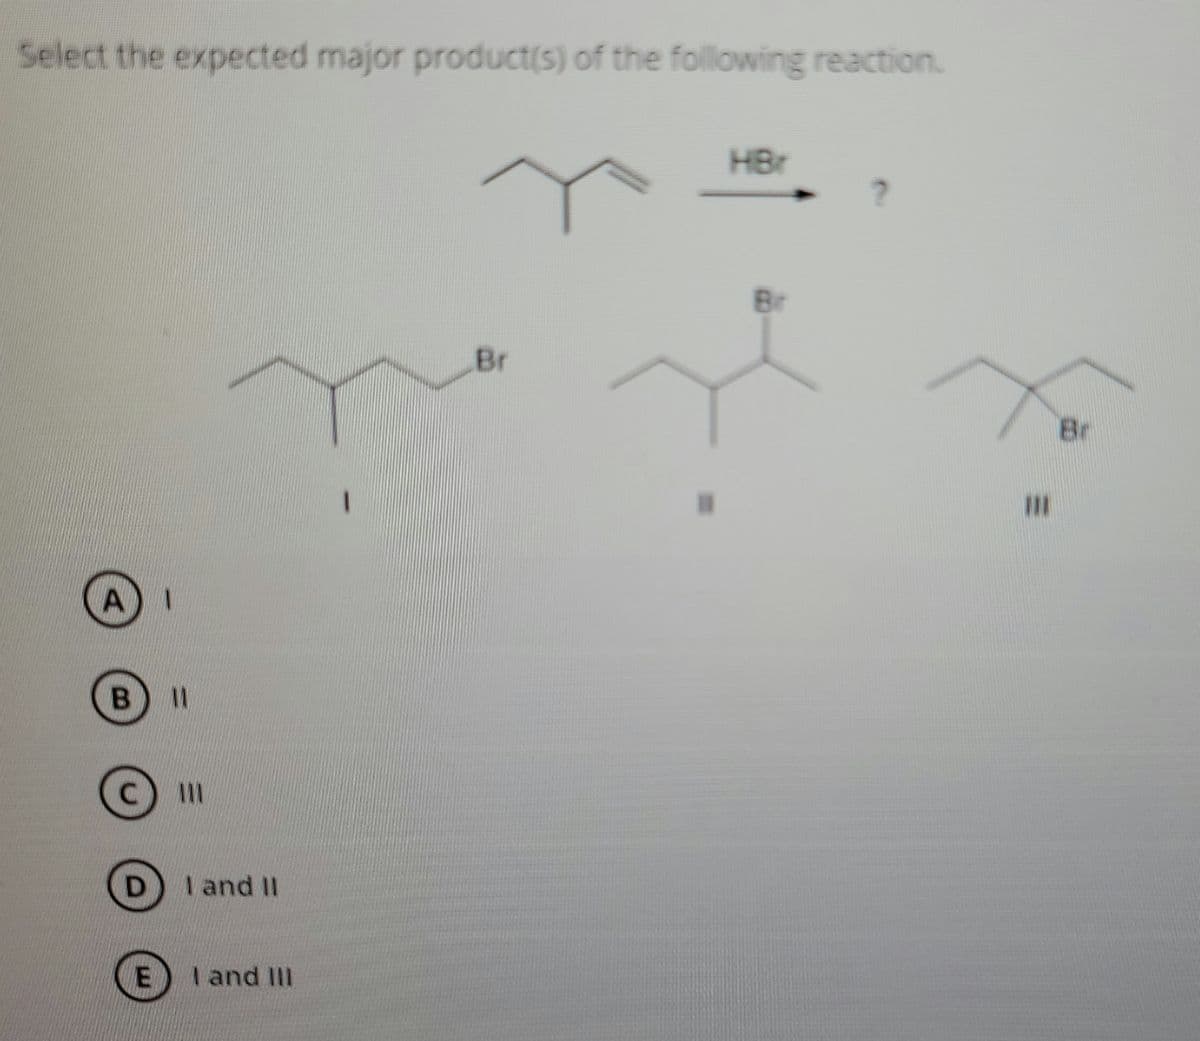 Select the expected major product(s) of the following reaction.
HBr
Br
Br
Br
II
III
I and II
I and II
